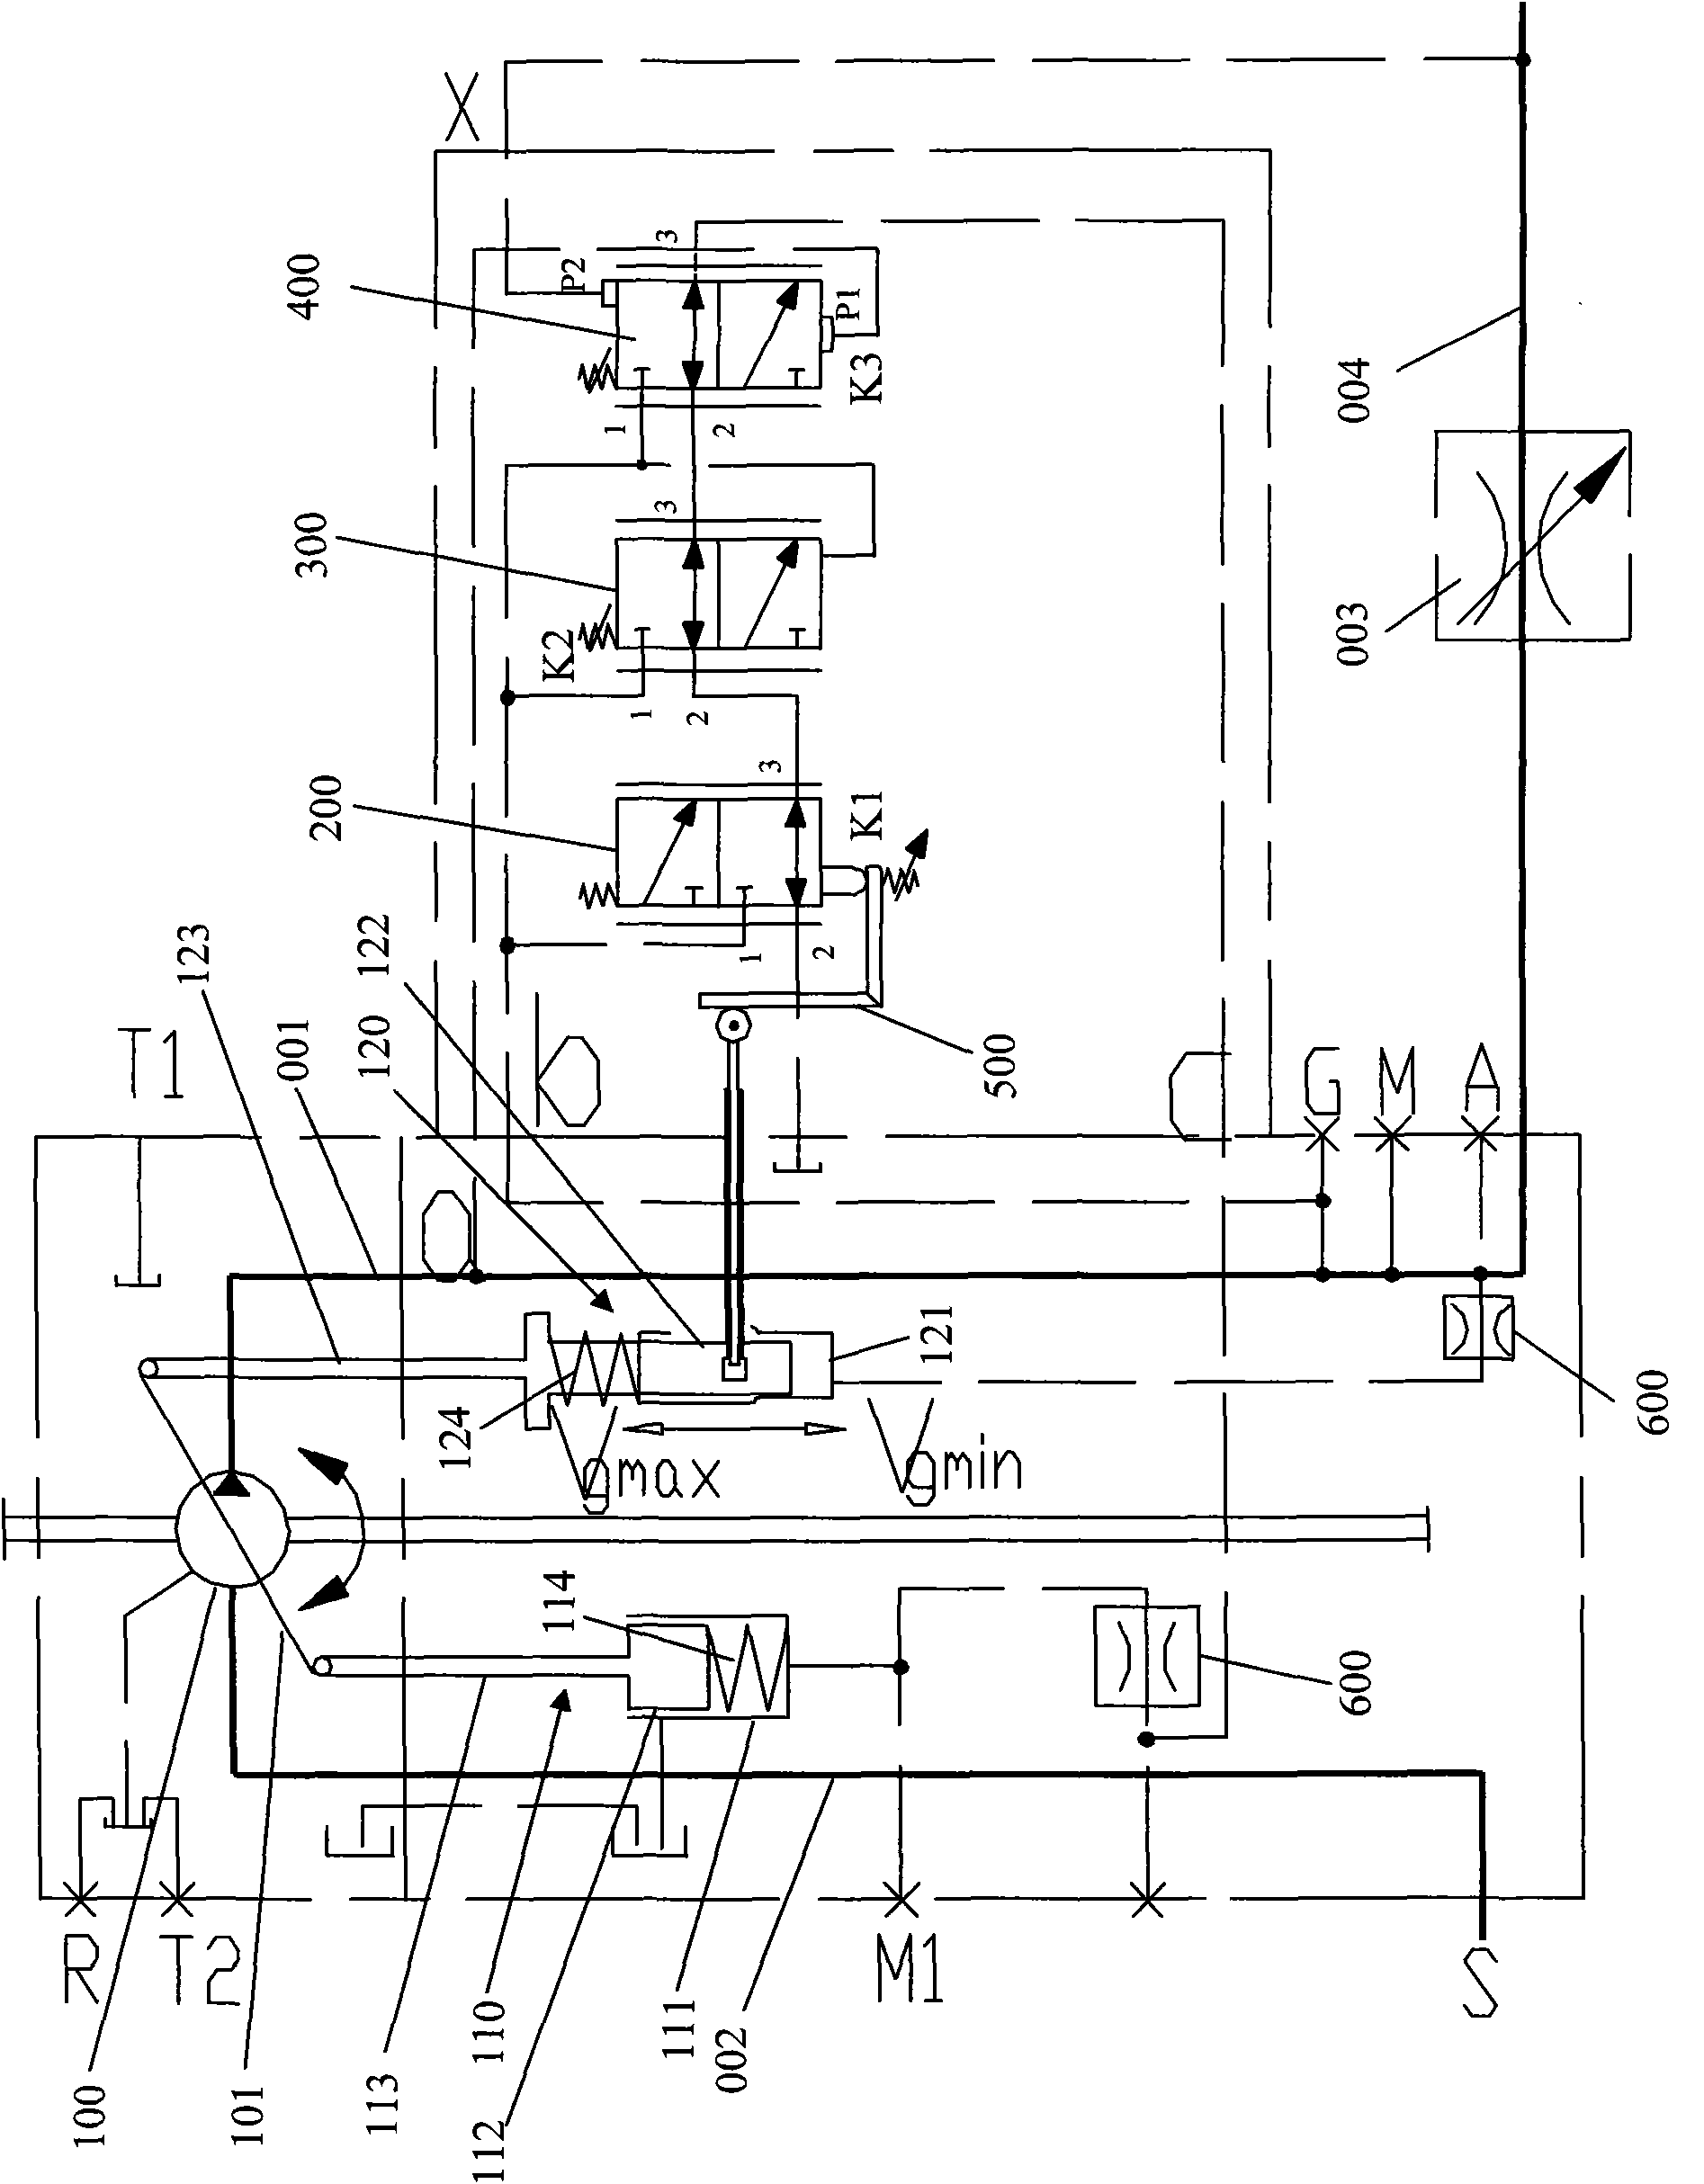 Variable control system of plunger variable pump